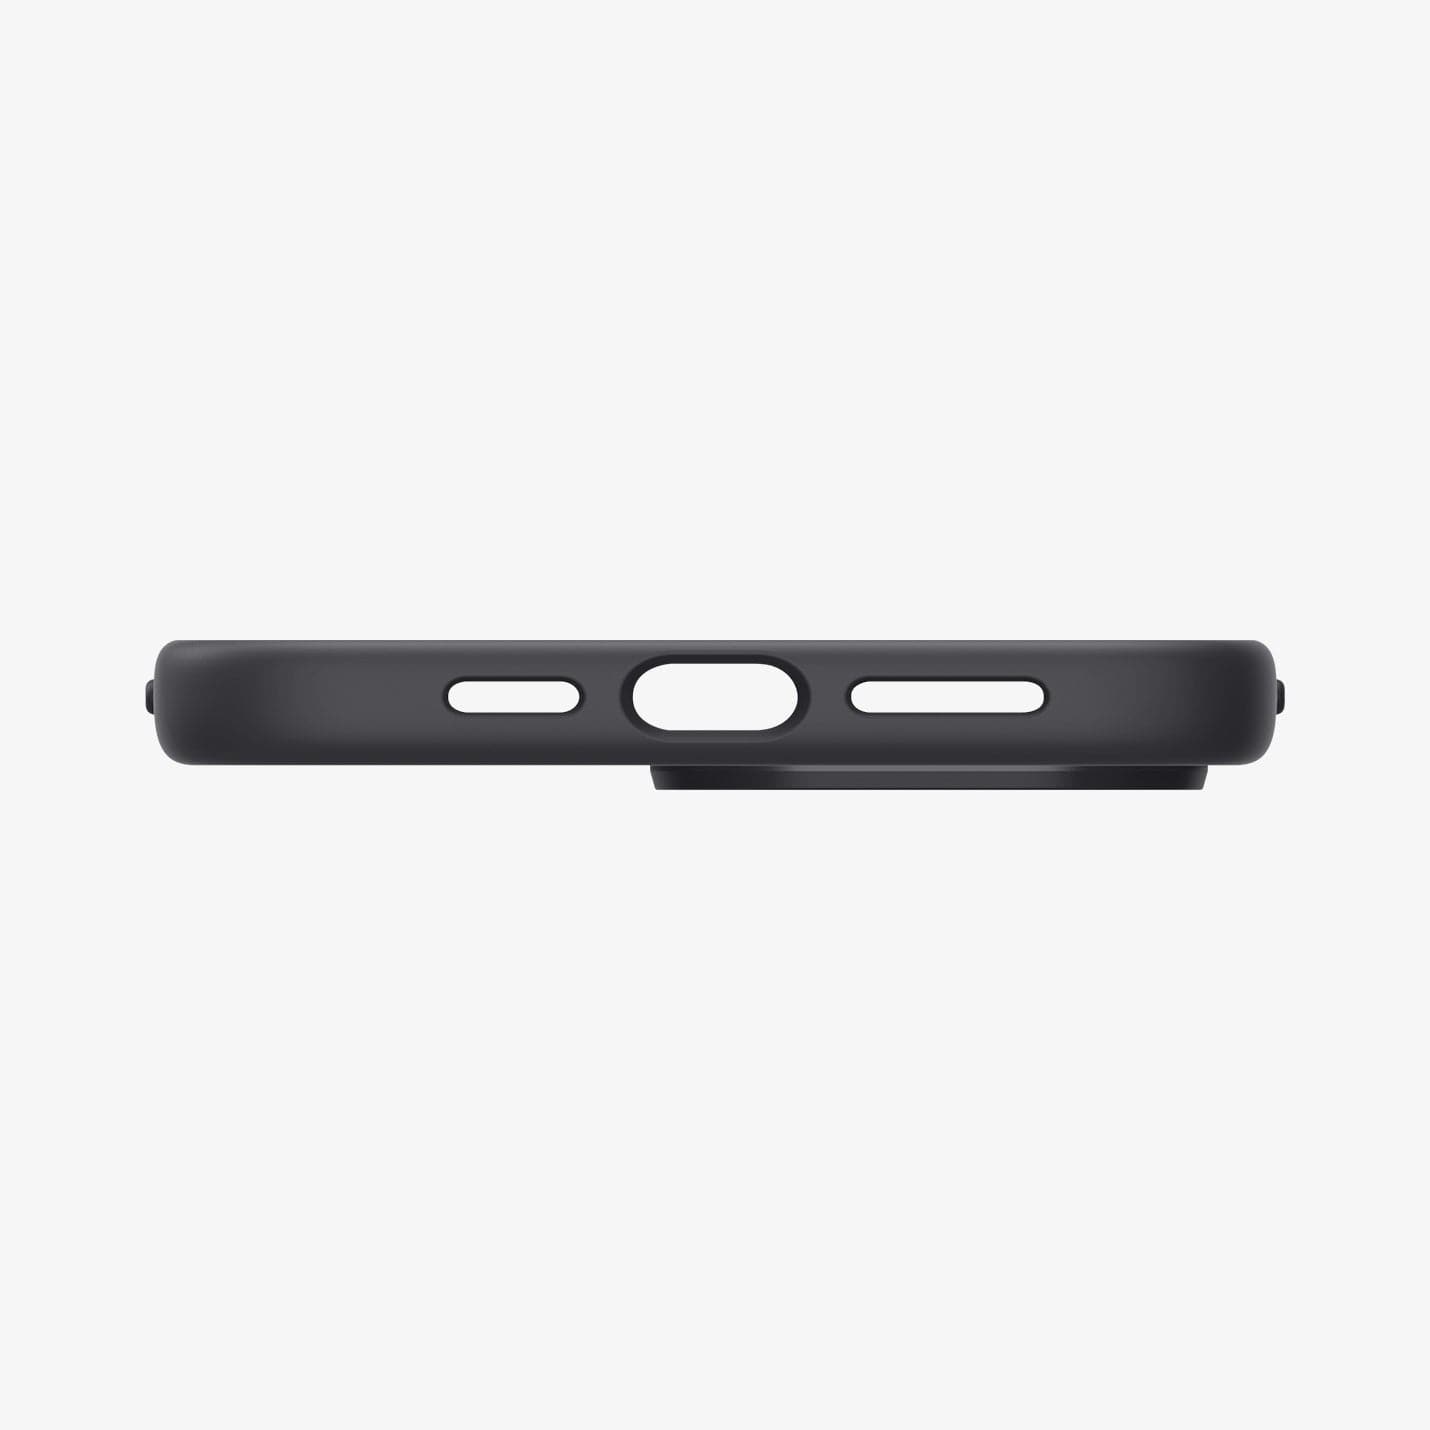 ACS04846 - iPhone 14 Pro Max Case Silicone Fit (MagFit) in black showing the bottom with precise cutouts